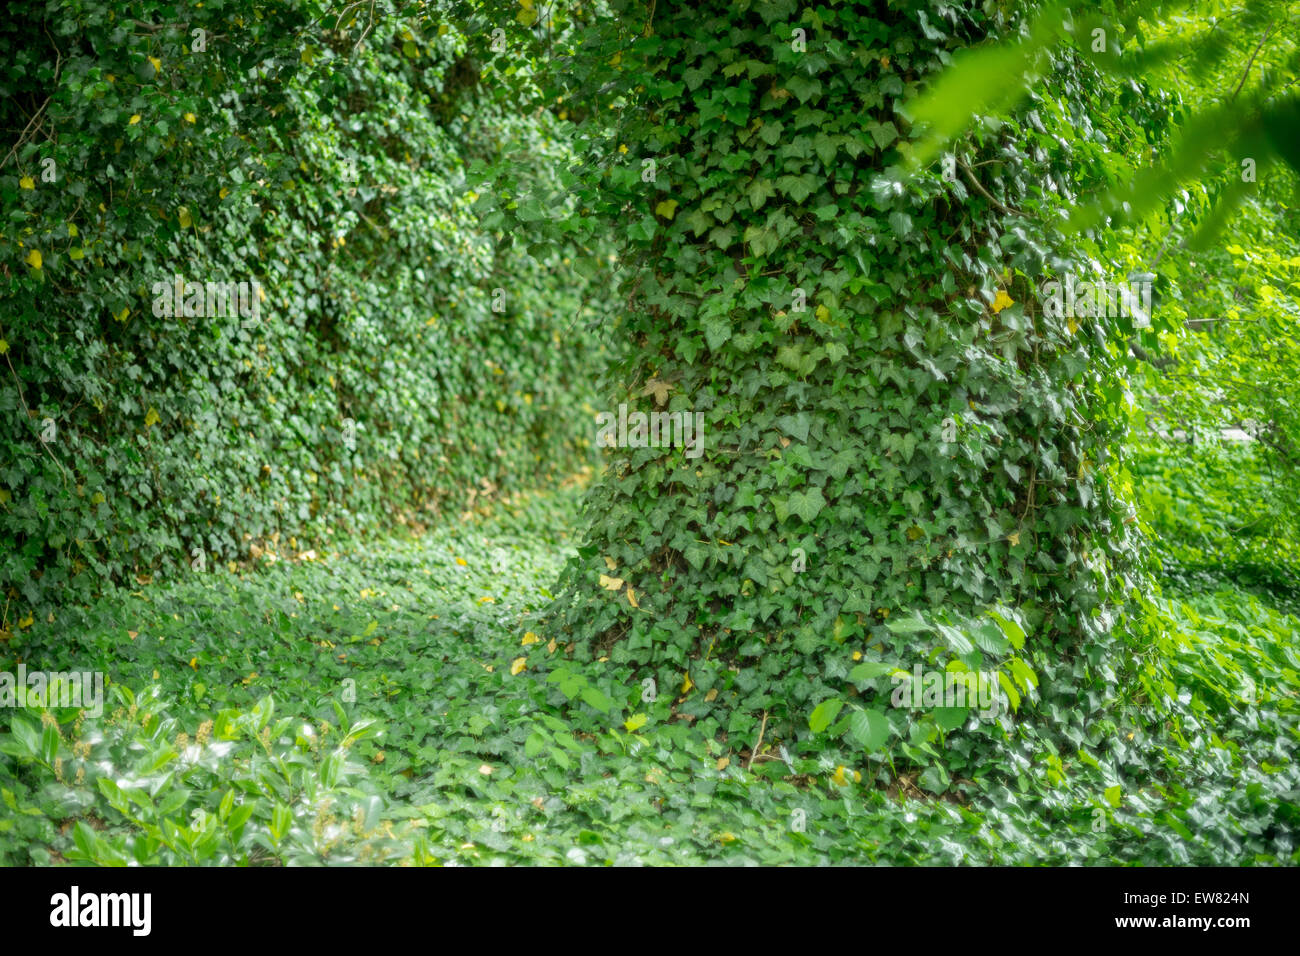 Old oak tree trunks covered with ivy Hedera helix Stock Photo